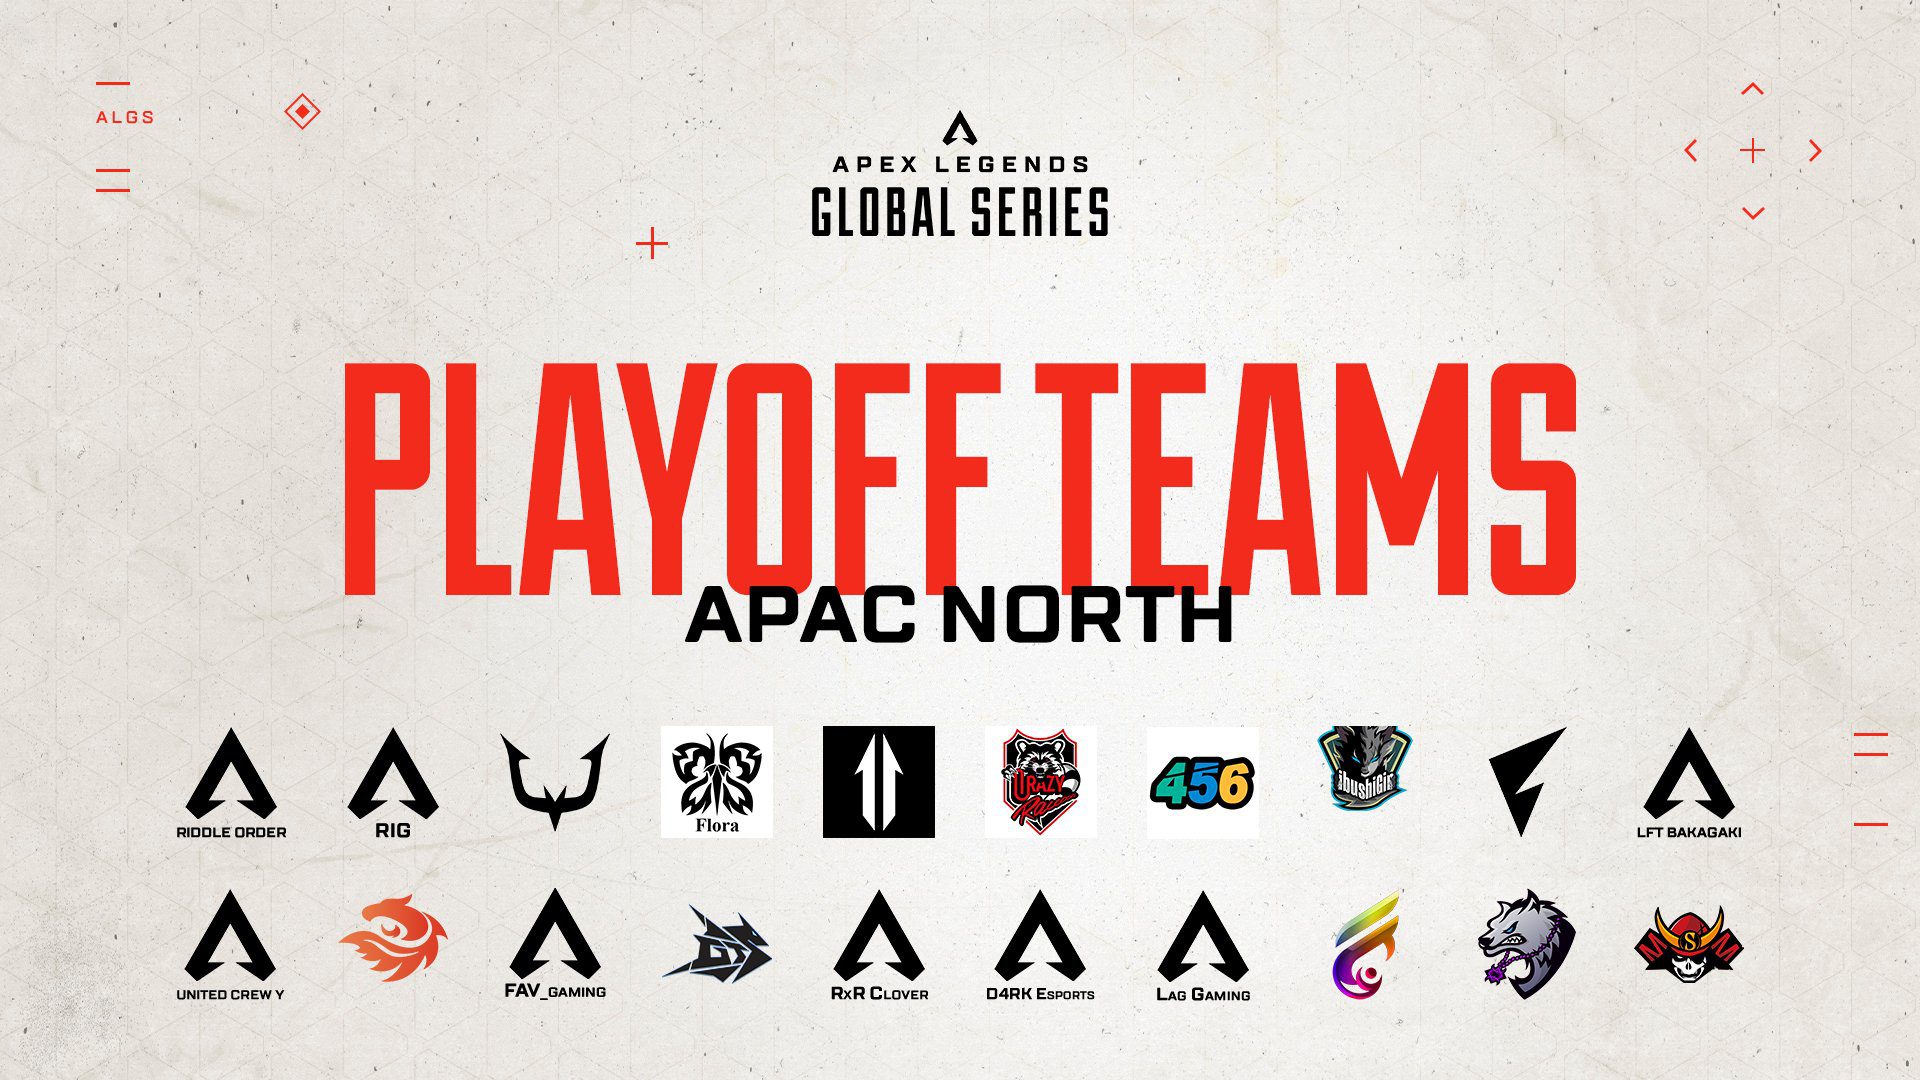 The APAC north teams that qualified for the ALGS Split 1 Playoffs